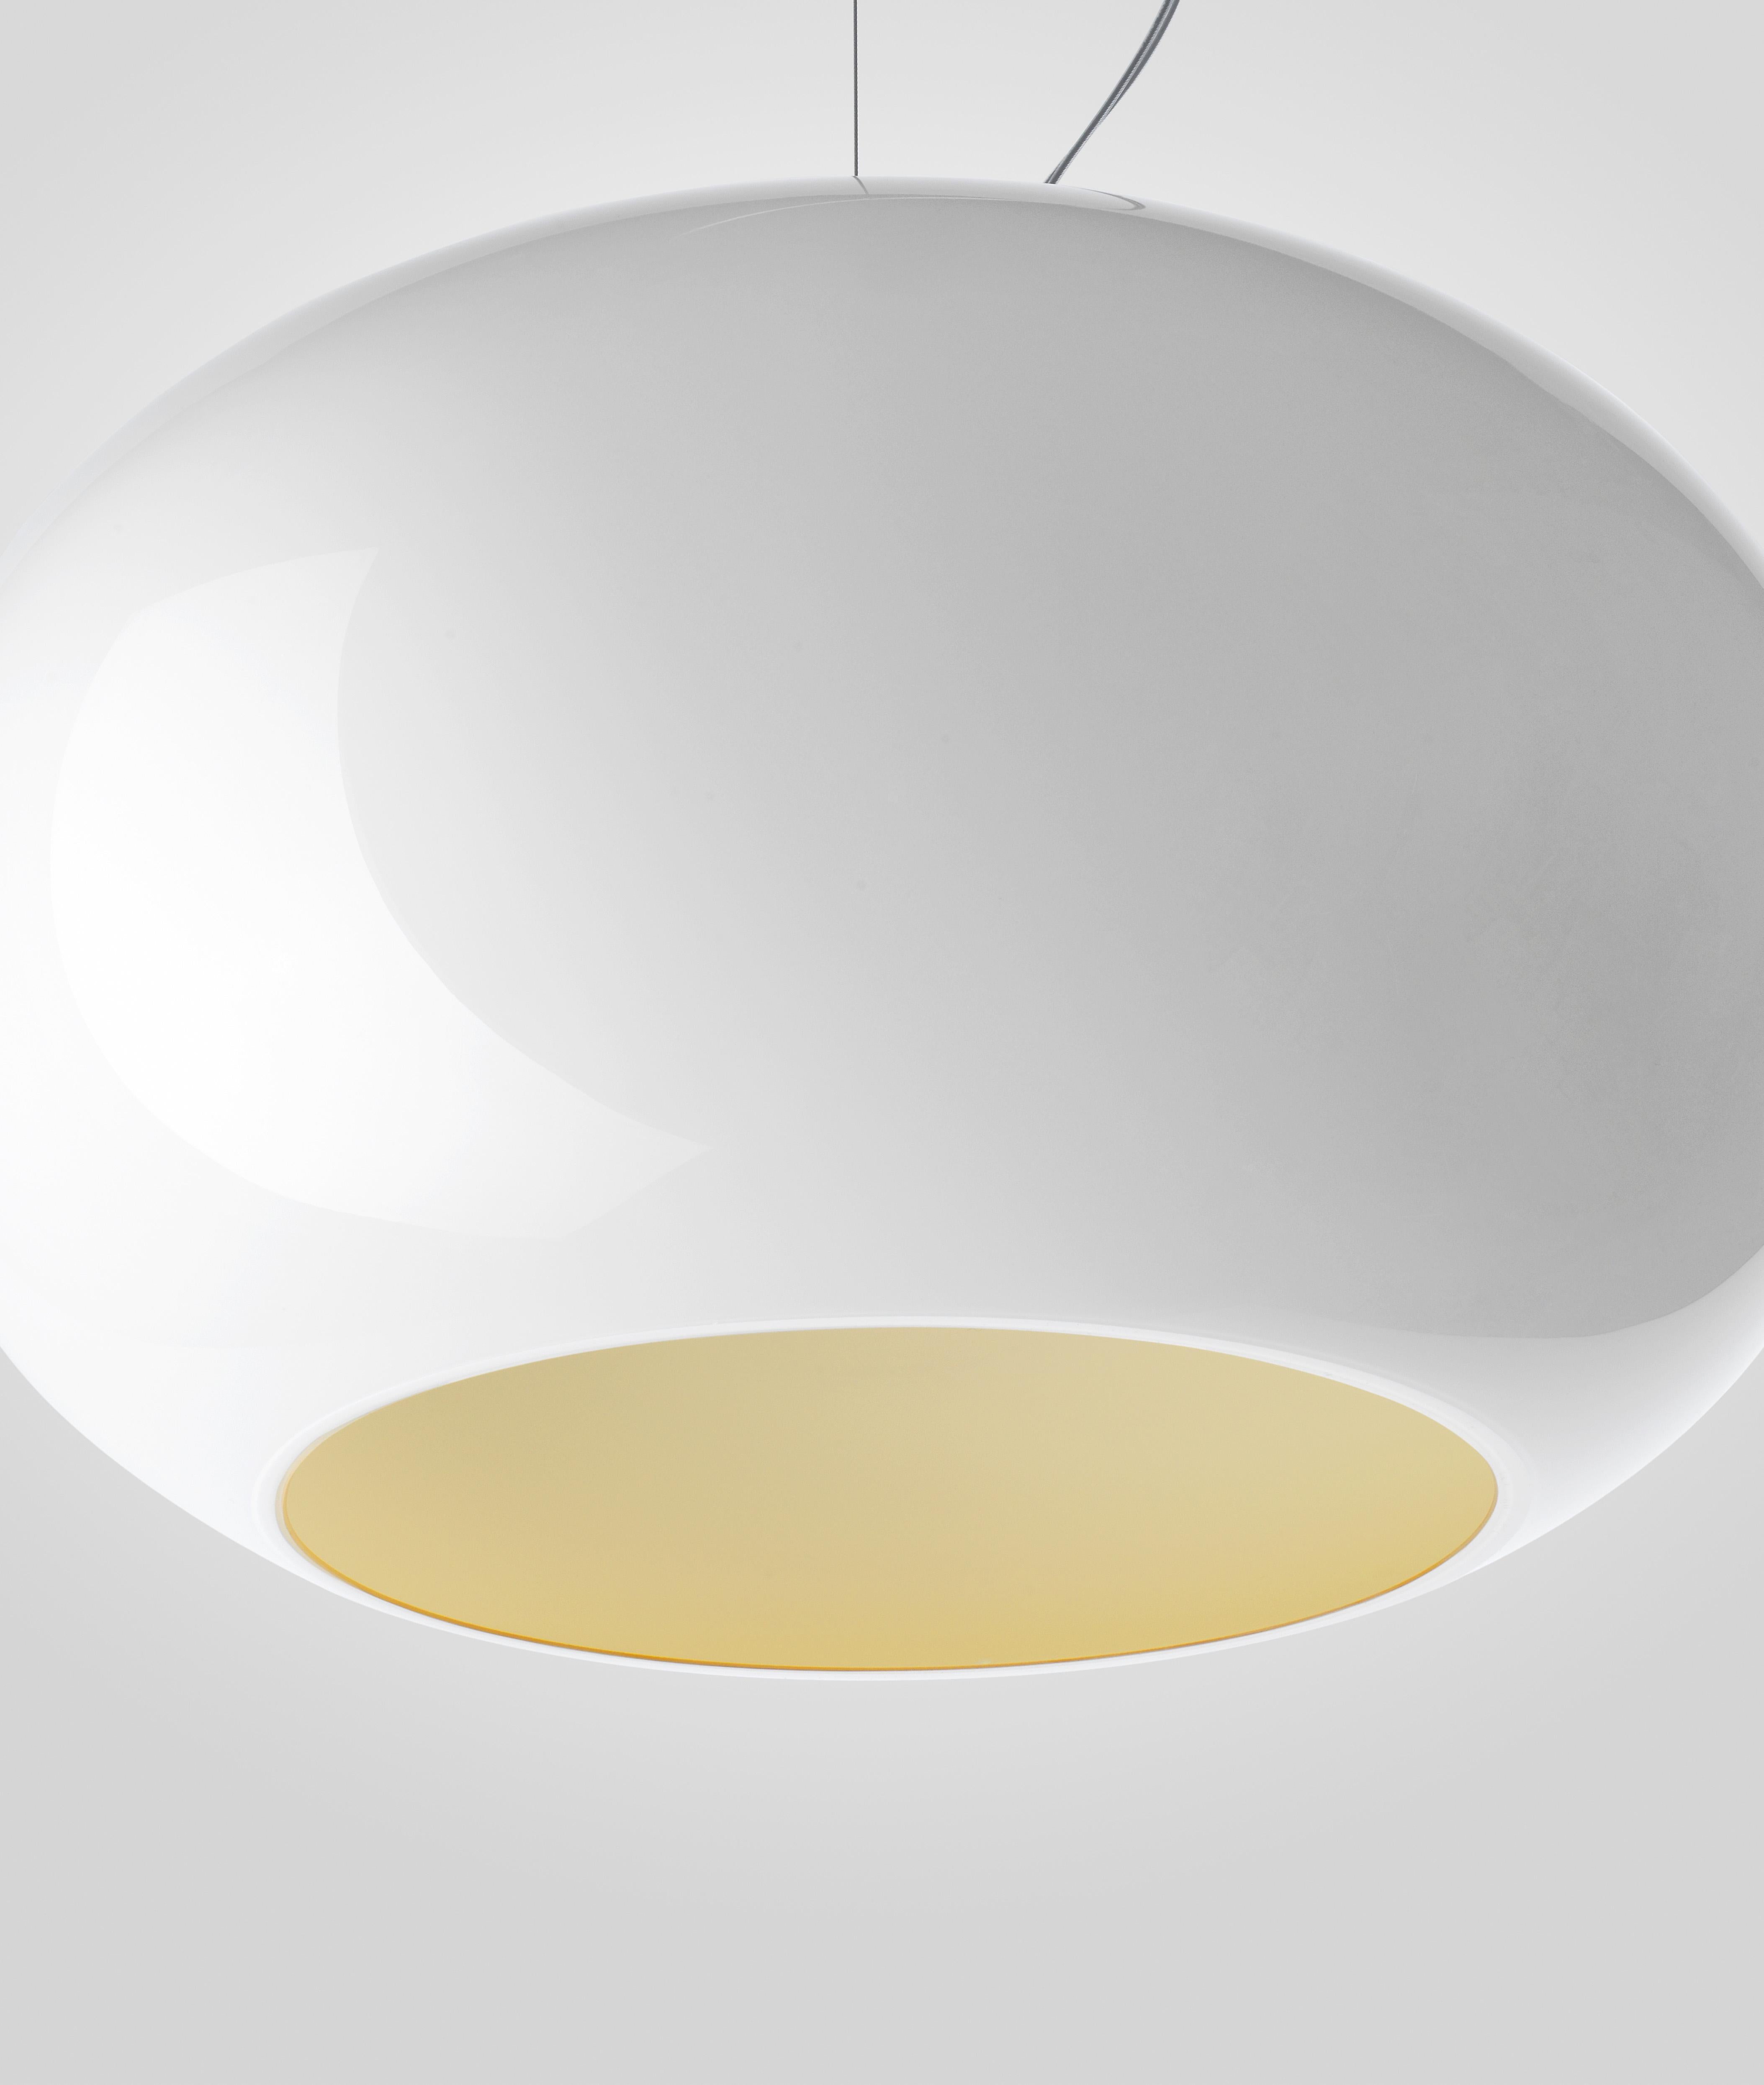 Suspension lamp with diffused light and down. Hand blown cased glass diffuser, white on the inside and colored on the outside, with glossy finish. With the straw-yellow interior, the 